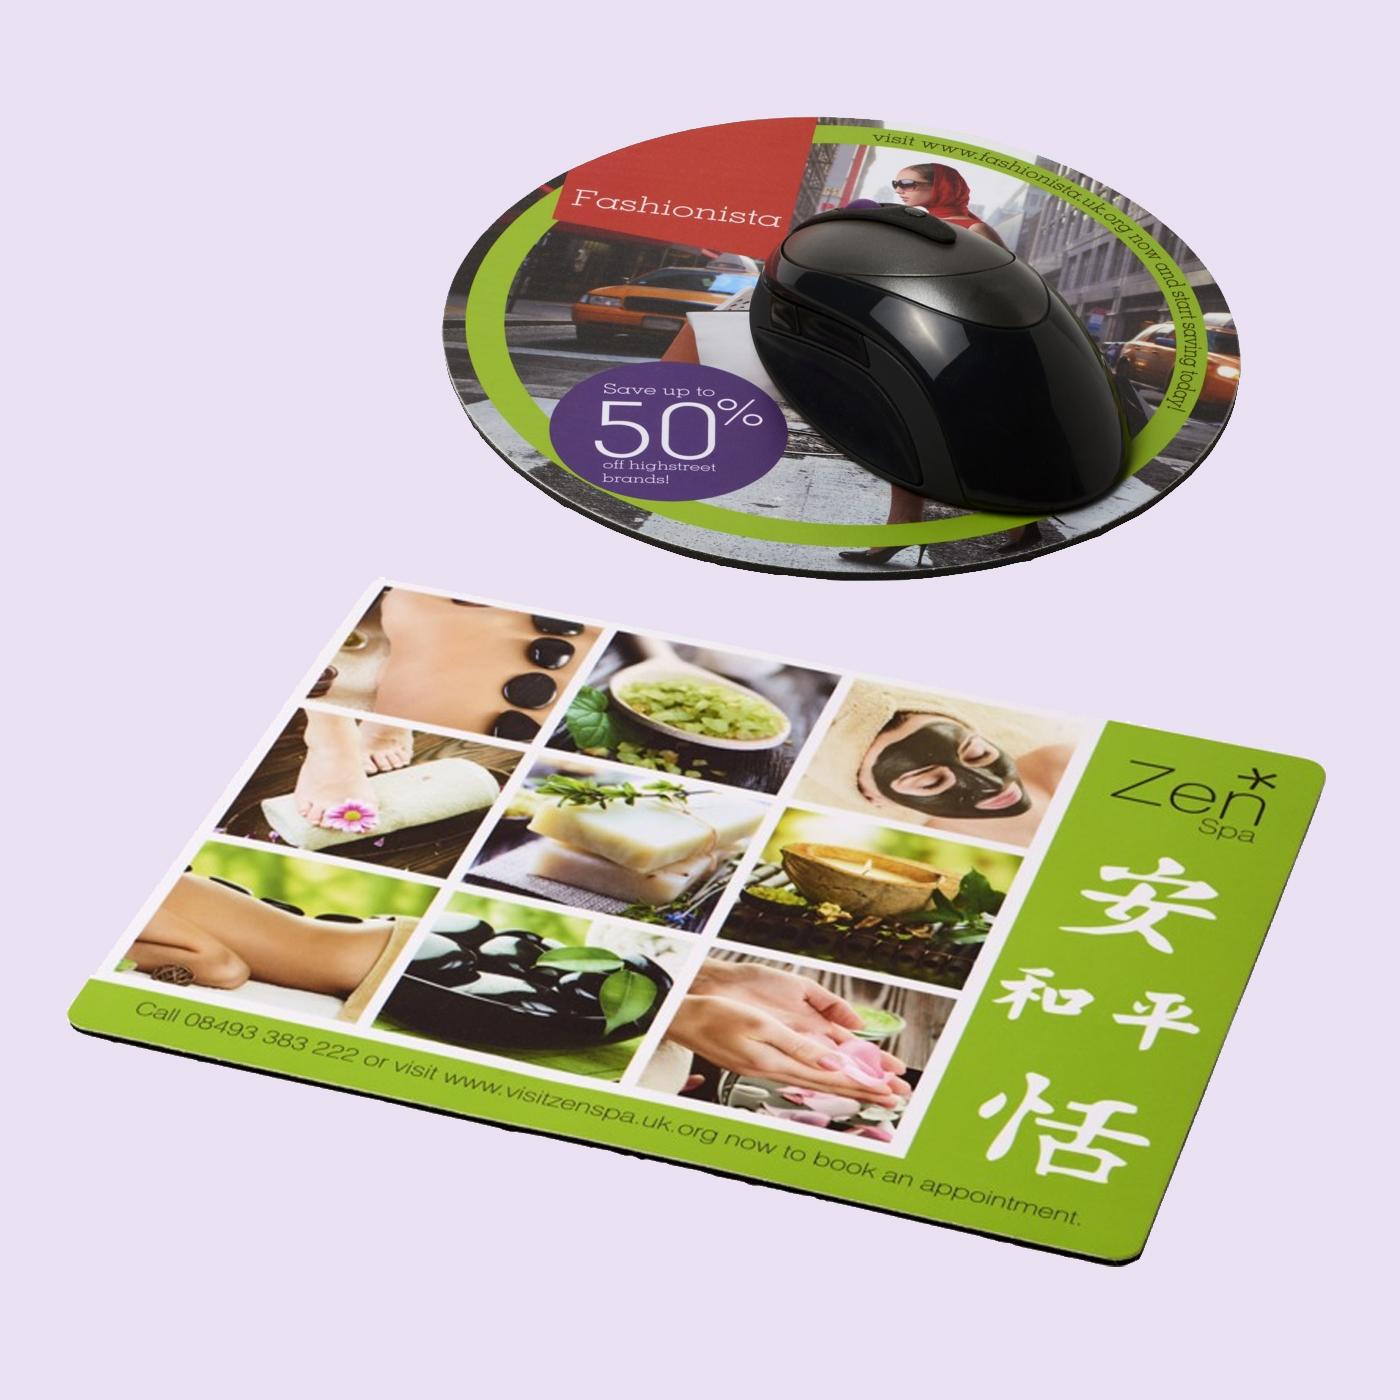 Printed round and rectangle mouse mats